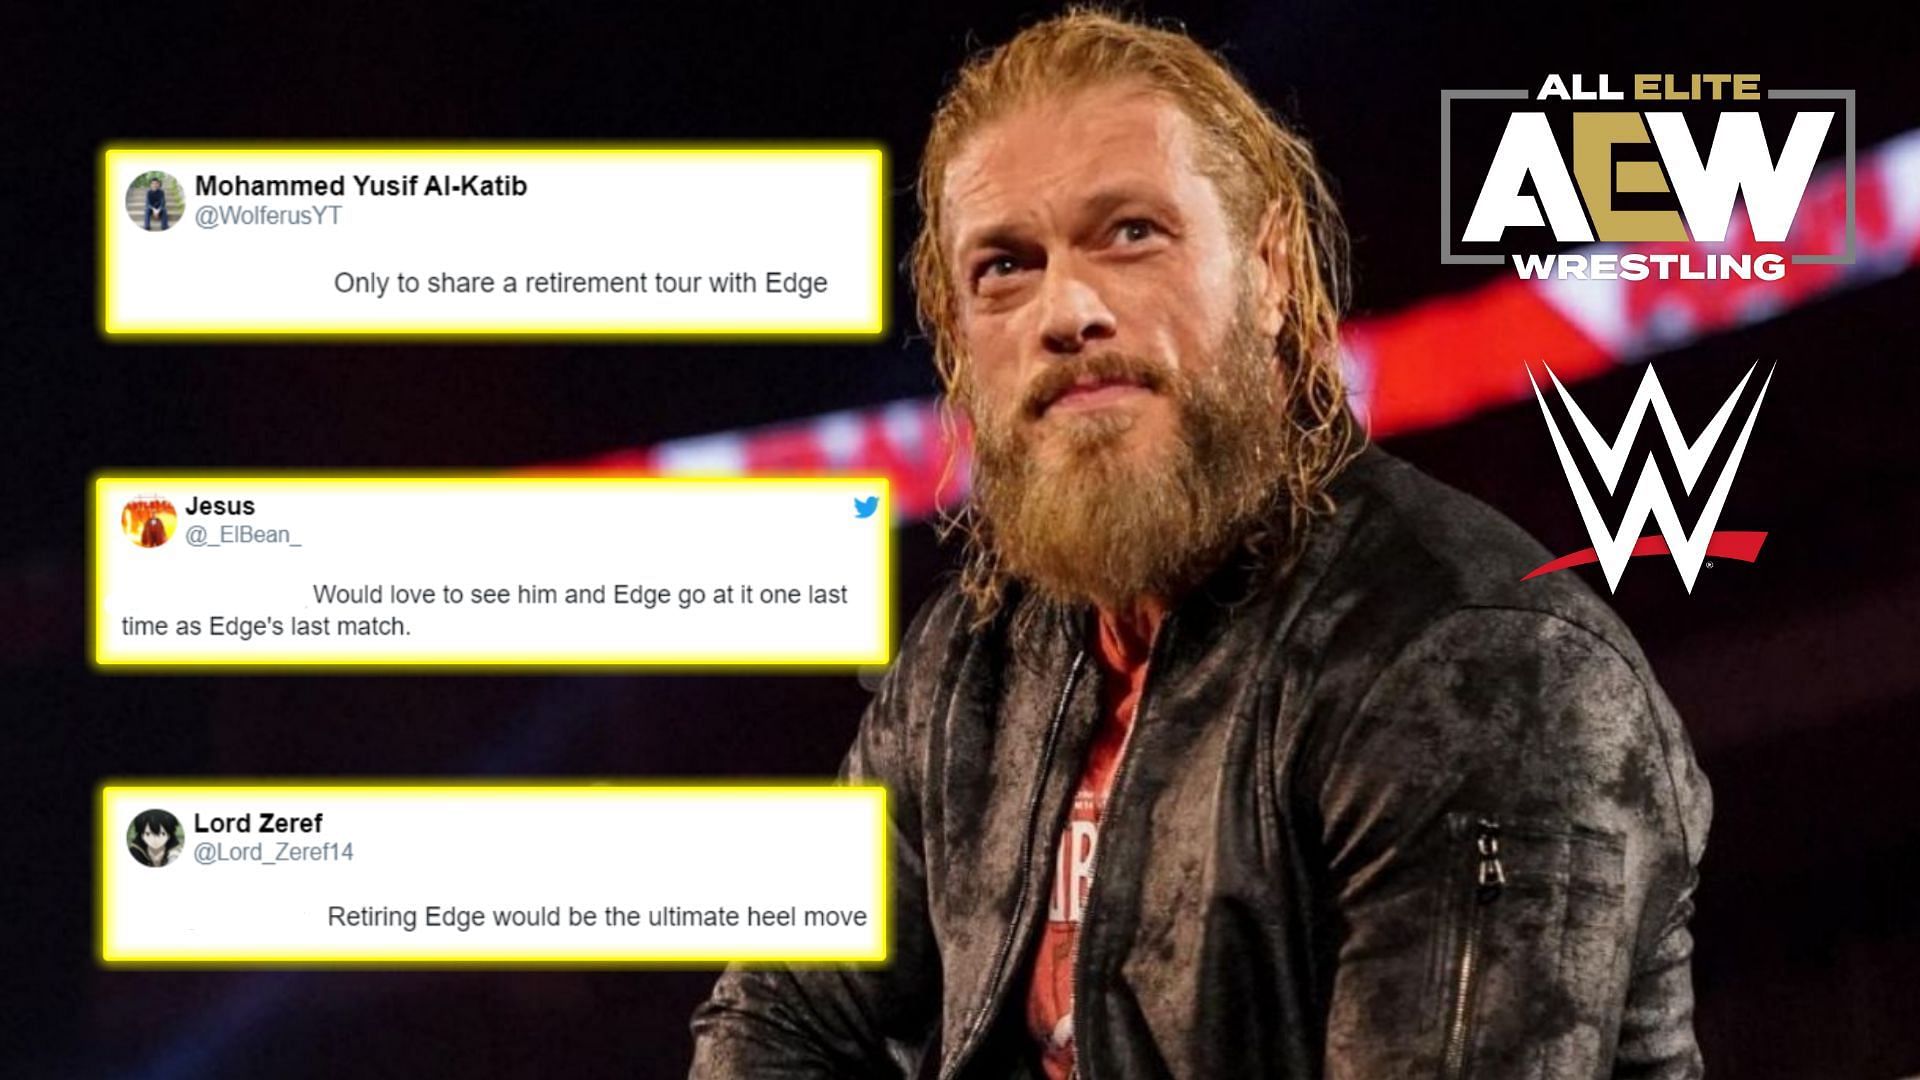 Edge is one of the top stars in WWE